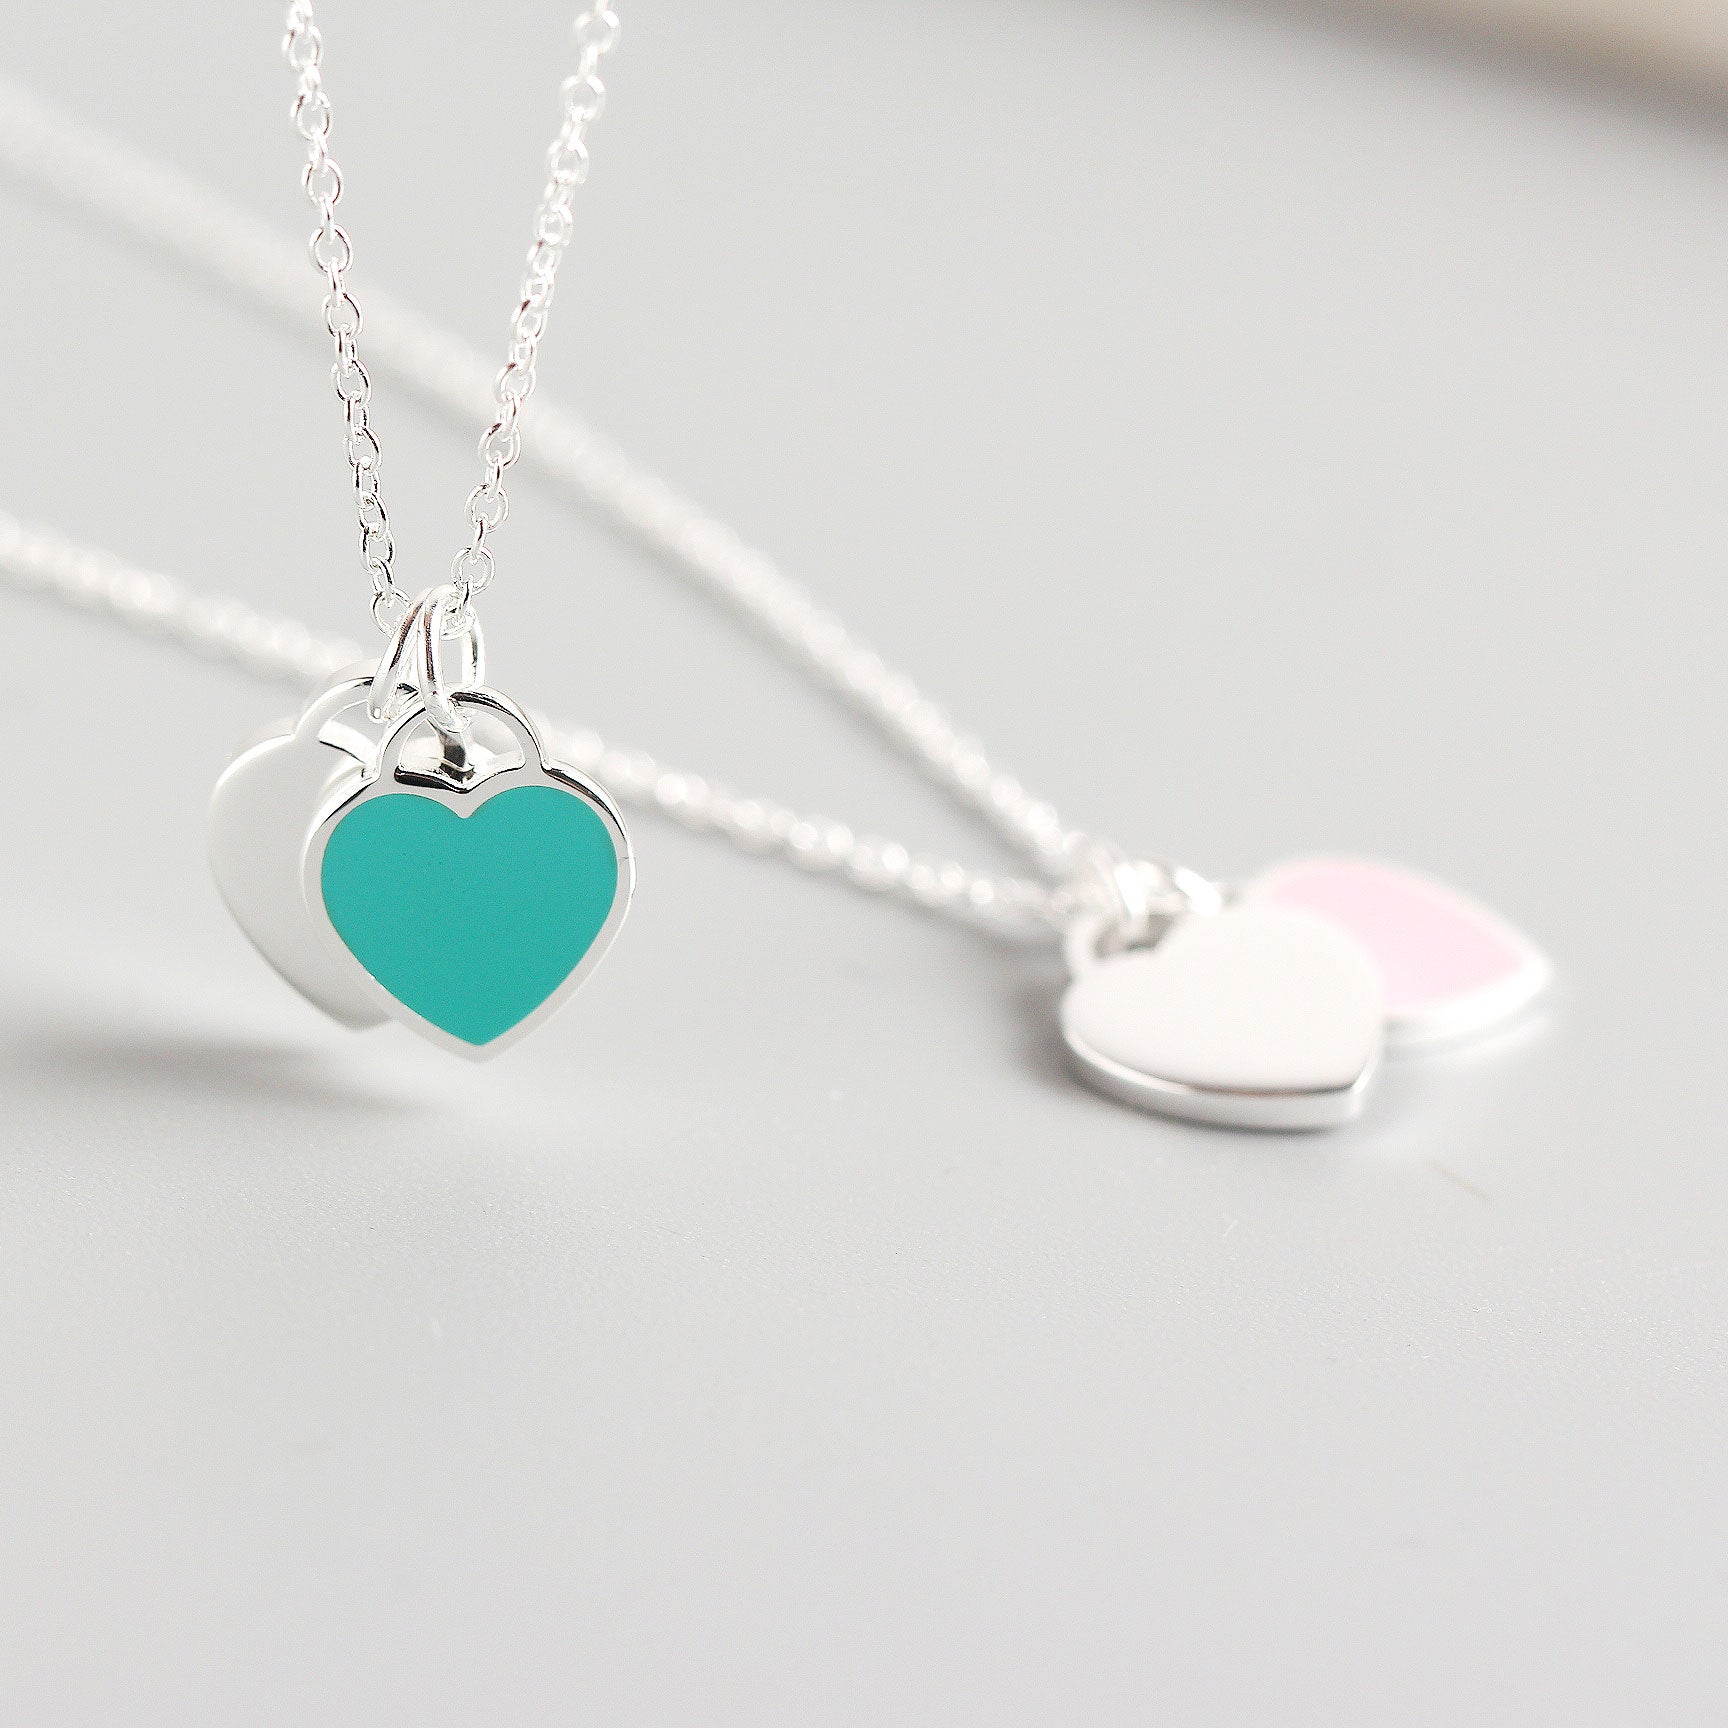 Mykay-sterling-silver-double-heart-pendant-necklace-with-enamel-finish 